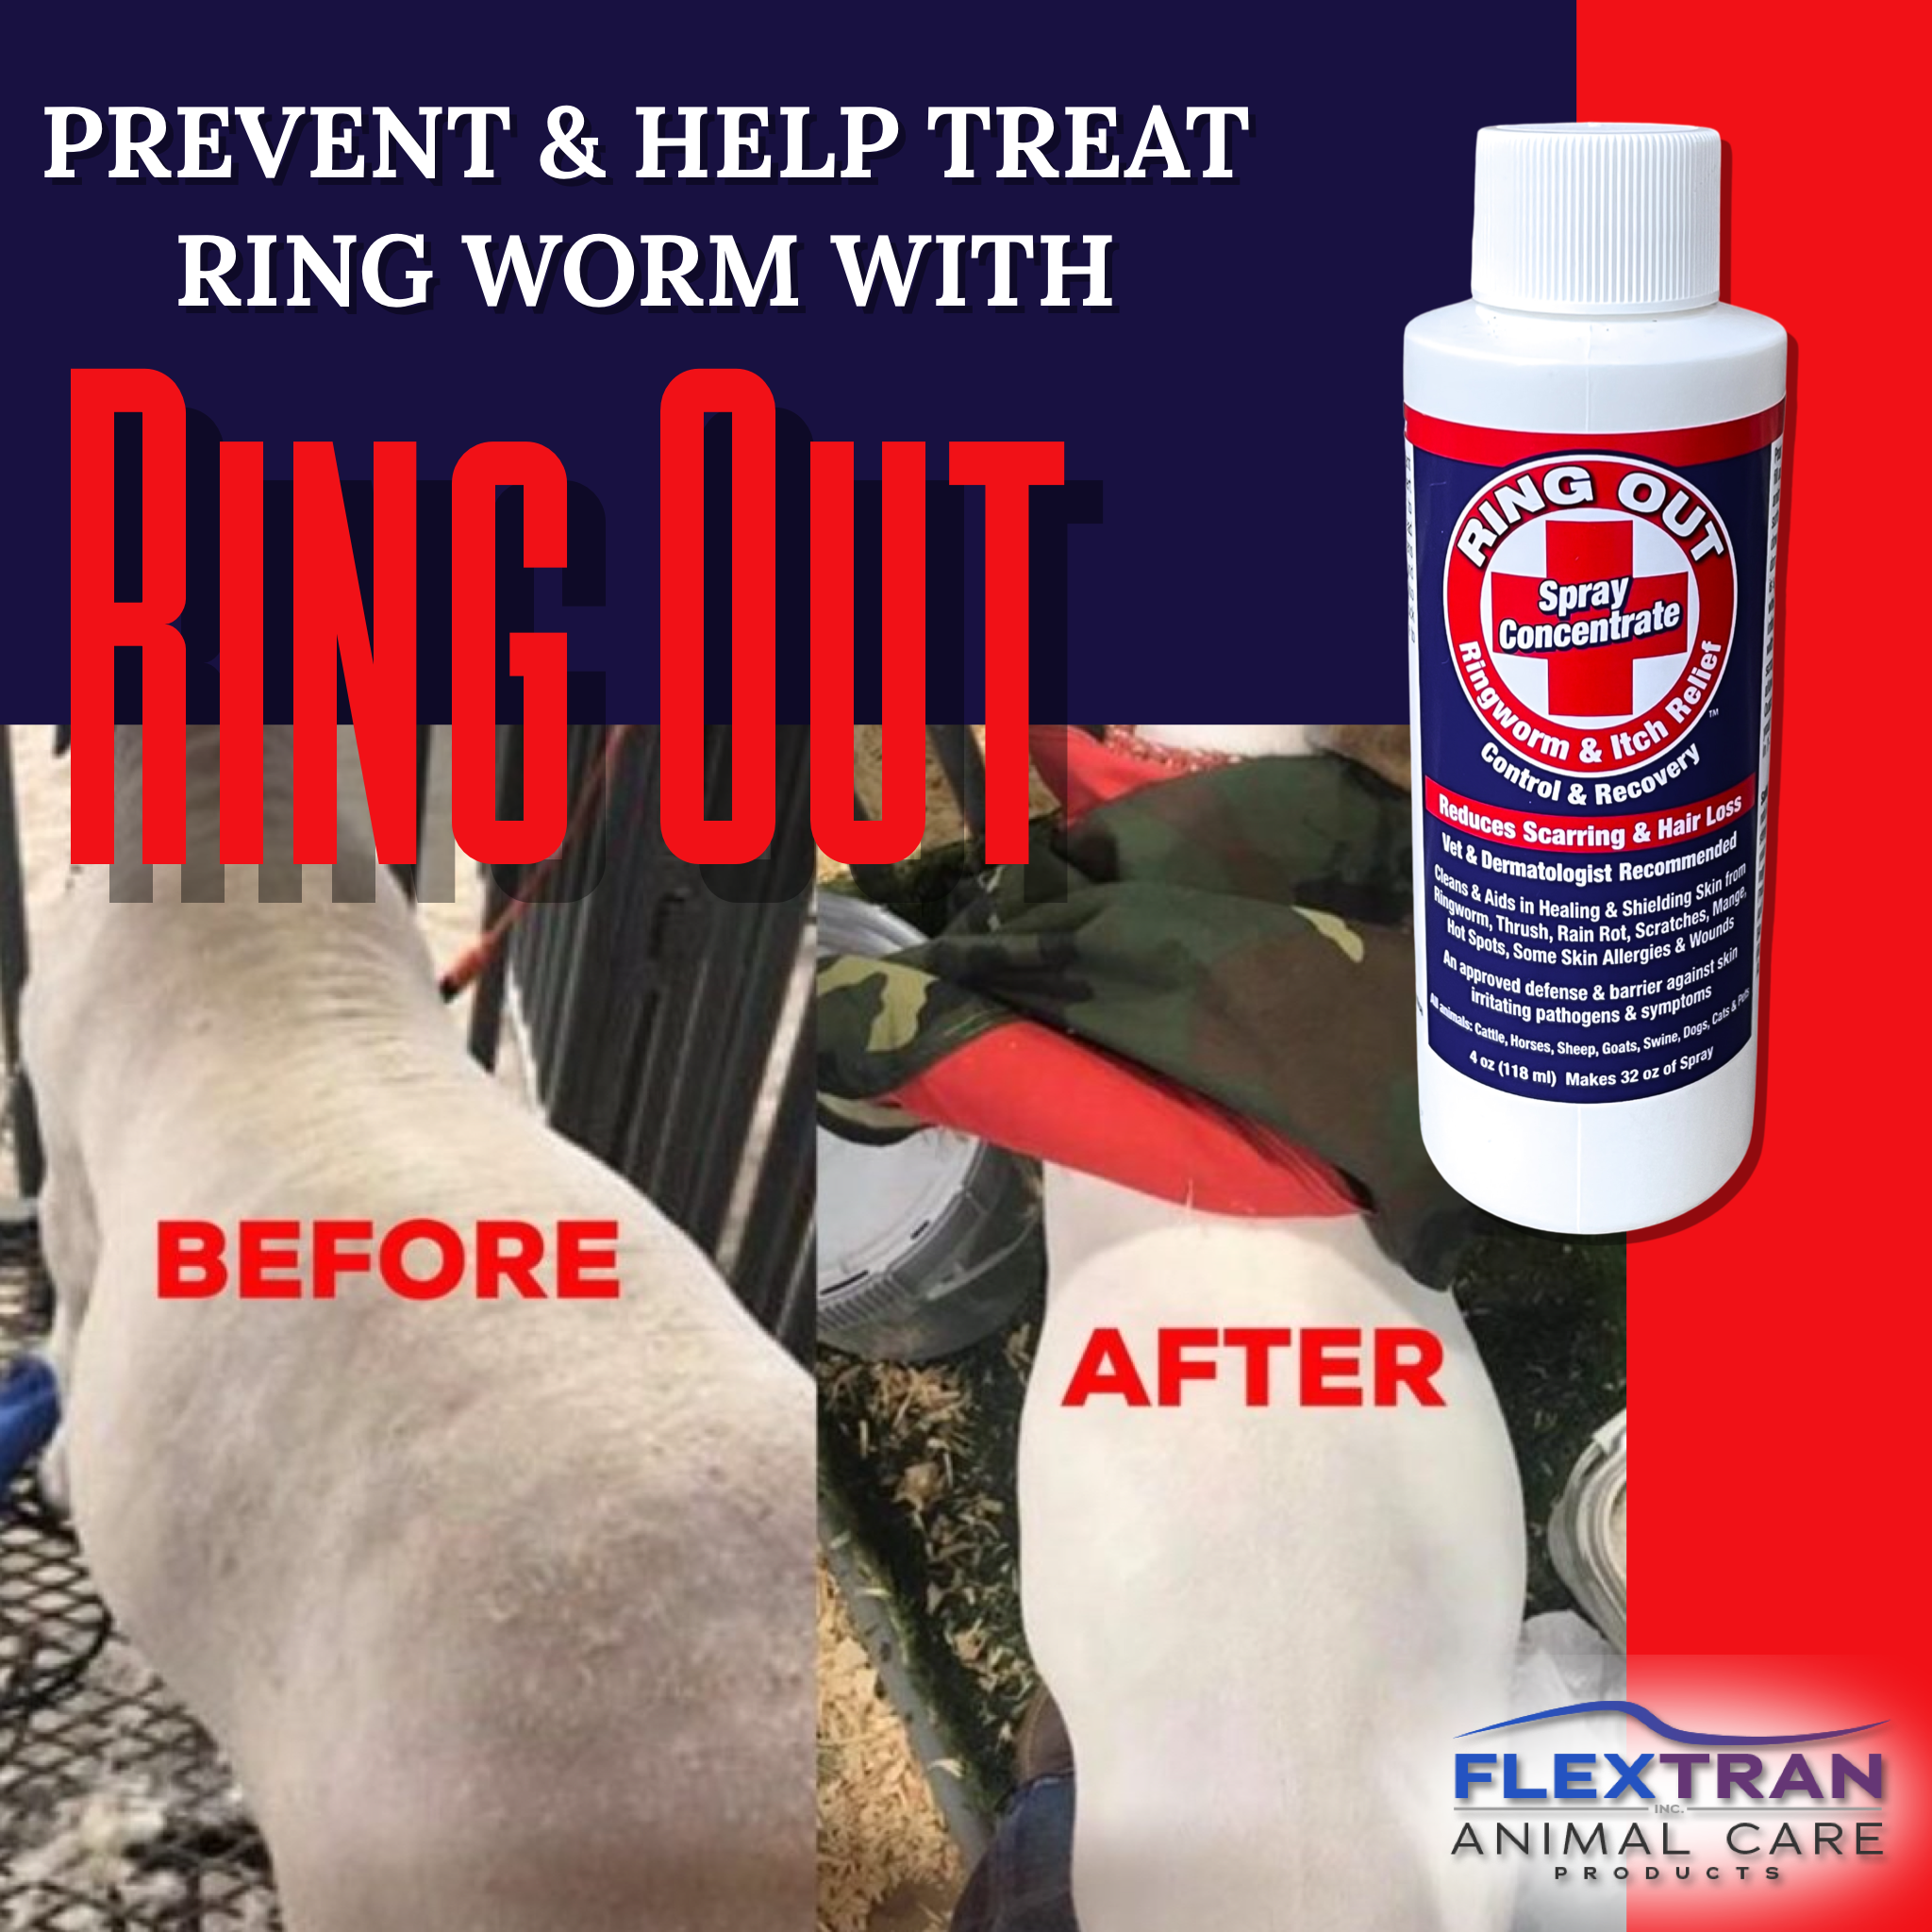 Combo Pack -  Ring Out Shampoo & 2 Bottles of Ring Out Concentrate - Prevent & Help Cure Ringworm & Other Fungi